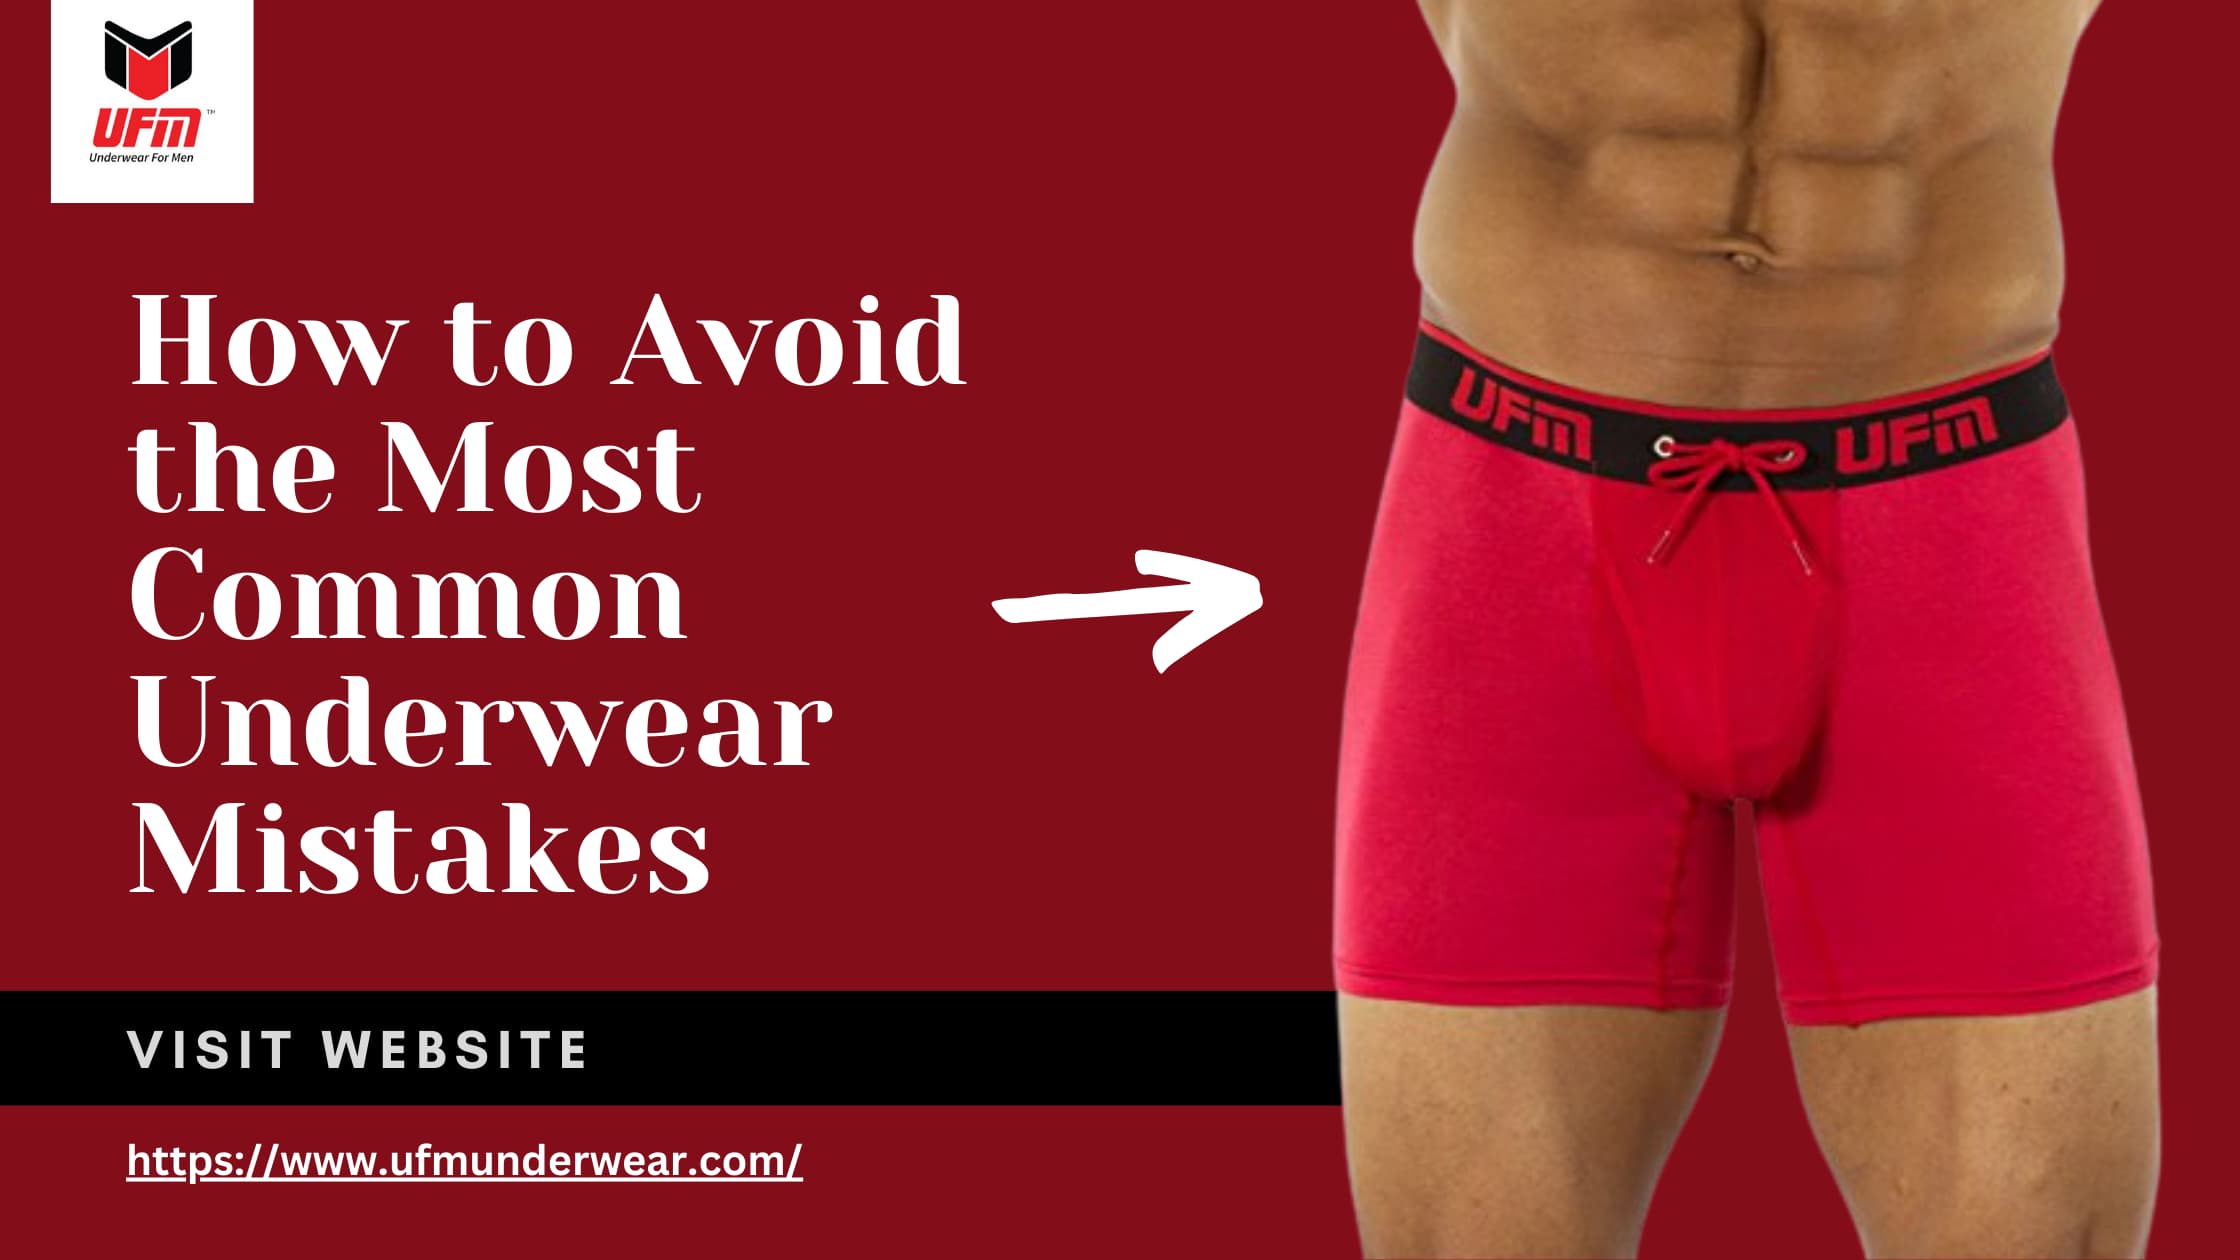 How to Avoid the Most Common Underwear Mistakes